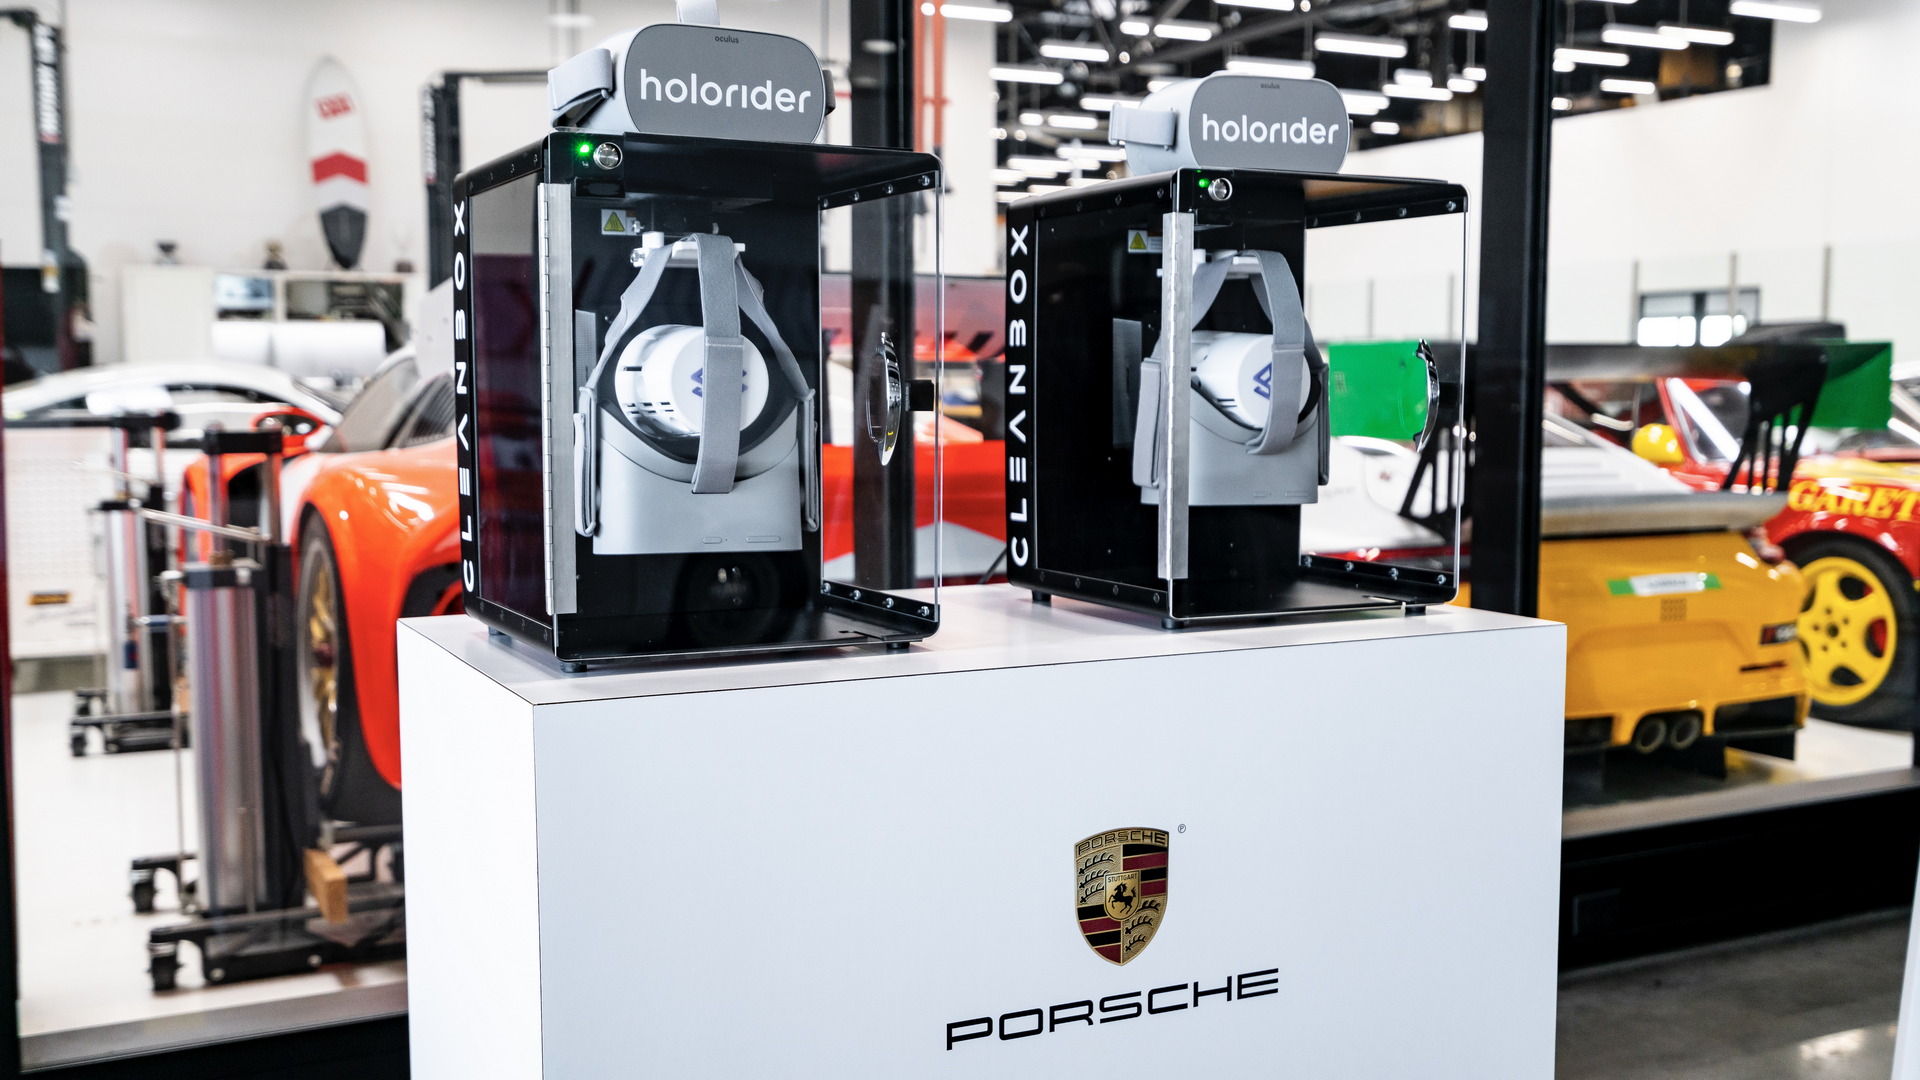 Porsche Launches In-Car Virtual Reality Ride At Their LA Experience Center With Holoride